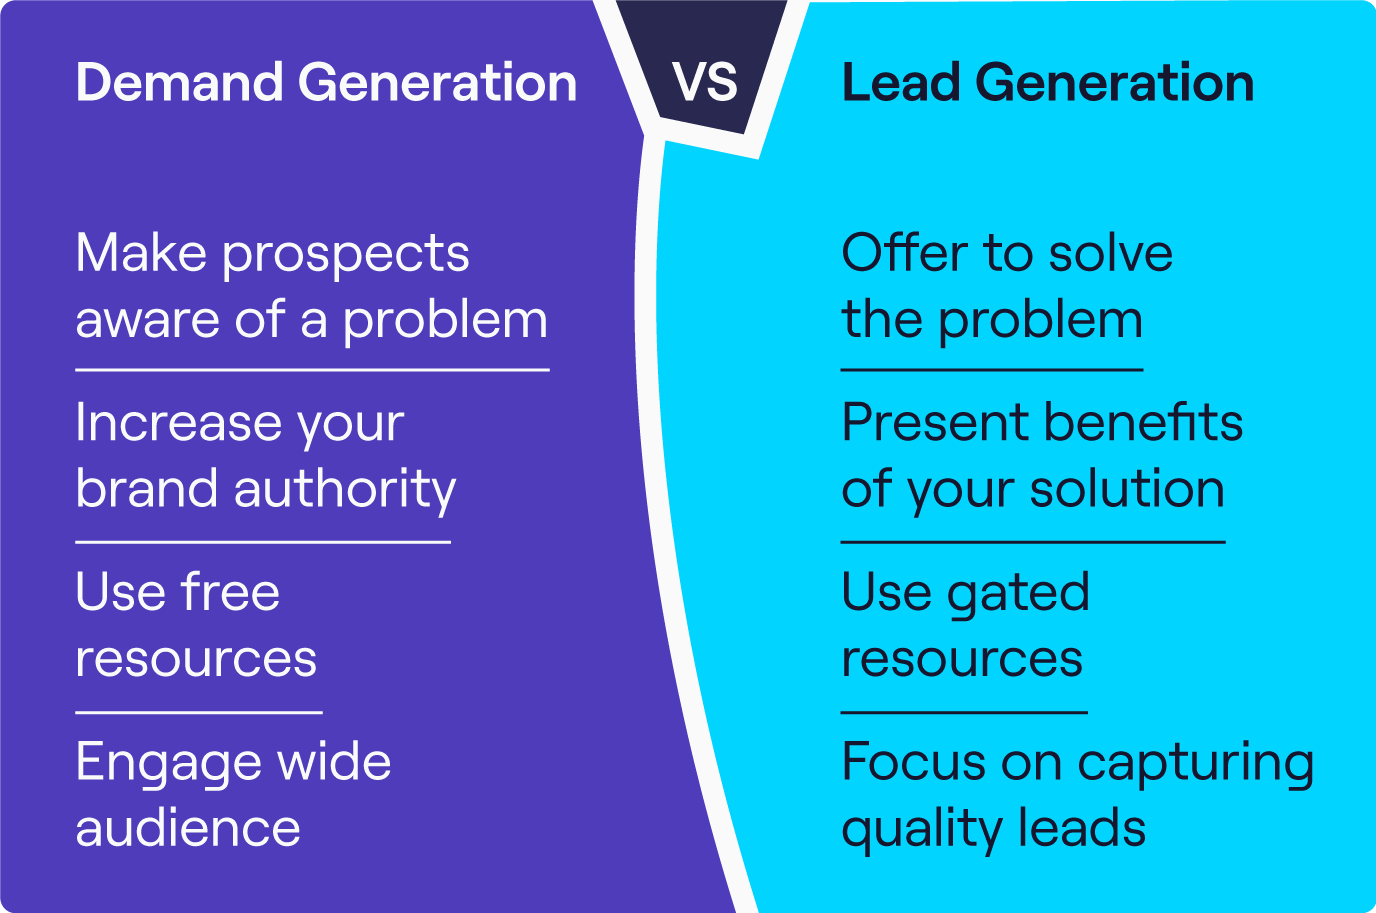 Demand Generation vs Lead Generation: The Main Difference